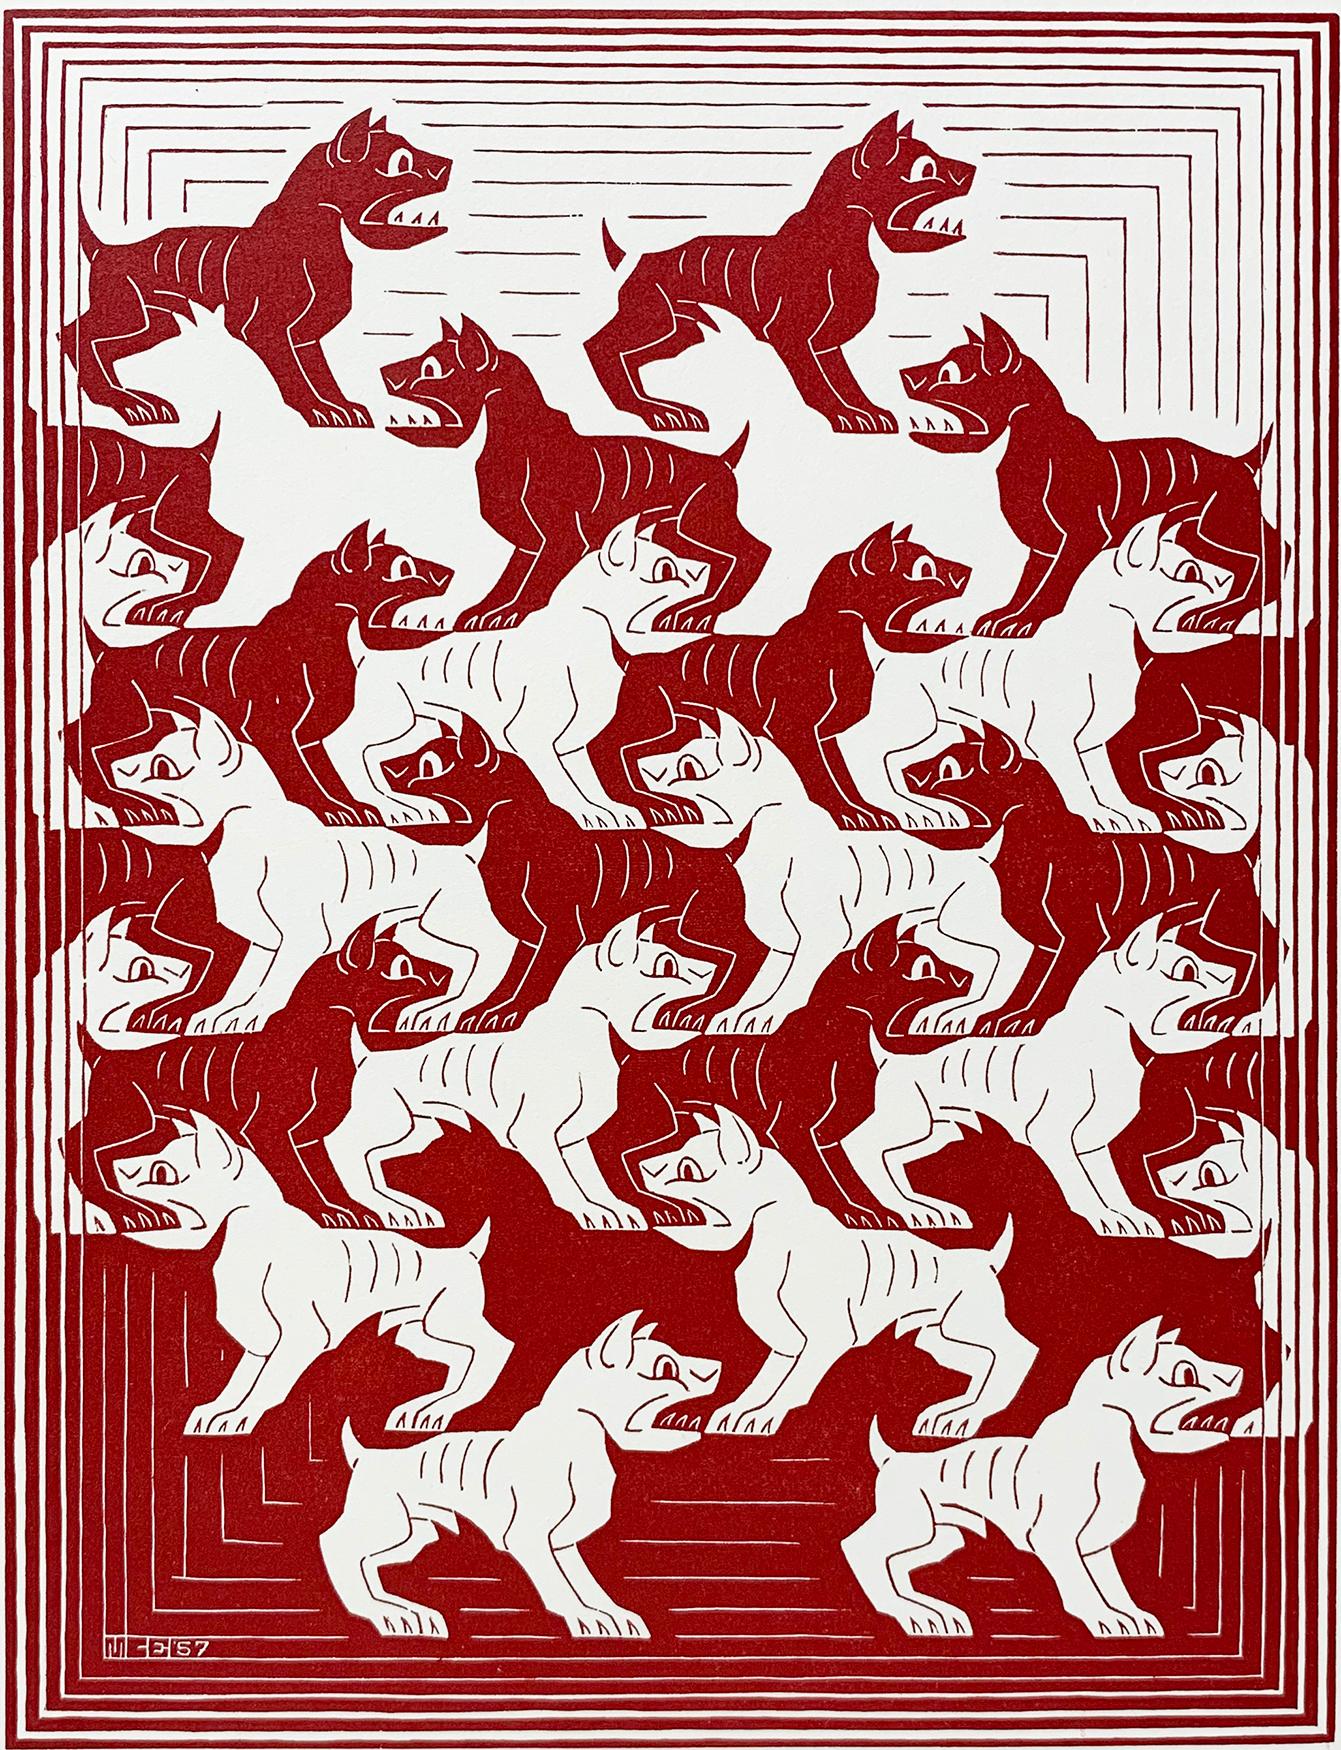 Regular division of the Plane IV (Dogs) - Print by M.C. Escher